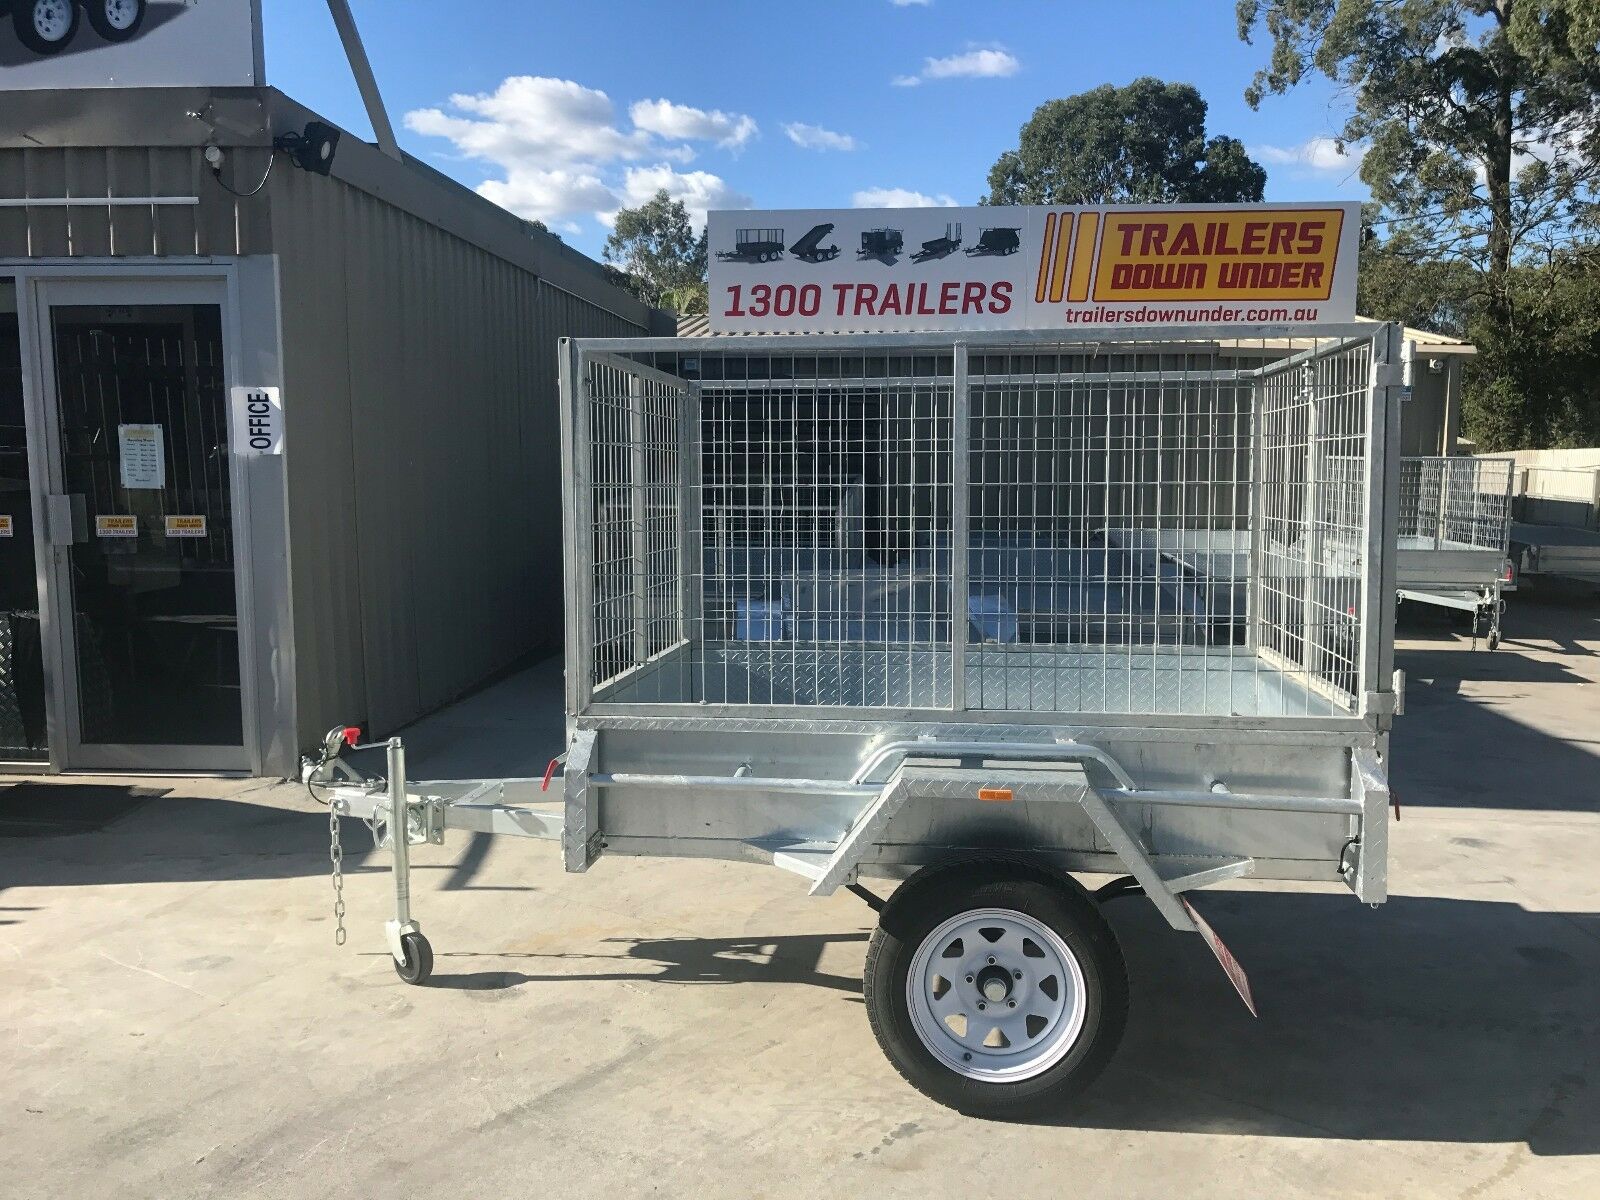 6×4 Galvanised Box Trailer with 2 Ft Cage for Sale in Brisbane<br><br><span class="galv-import">Imported Trailer</span>